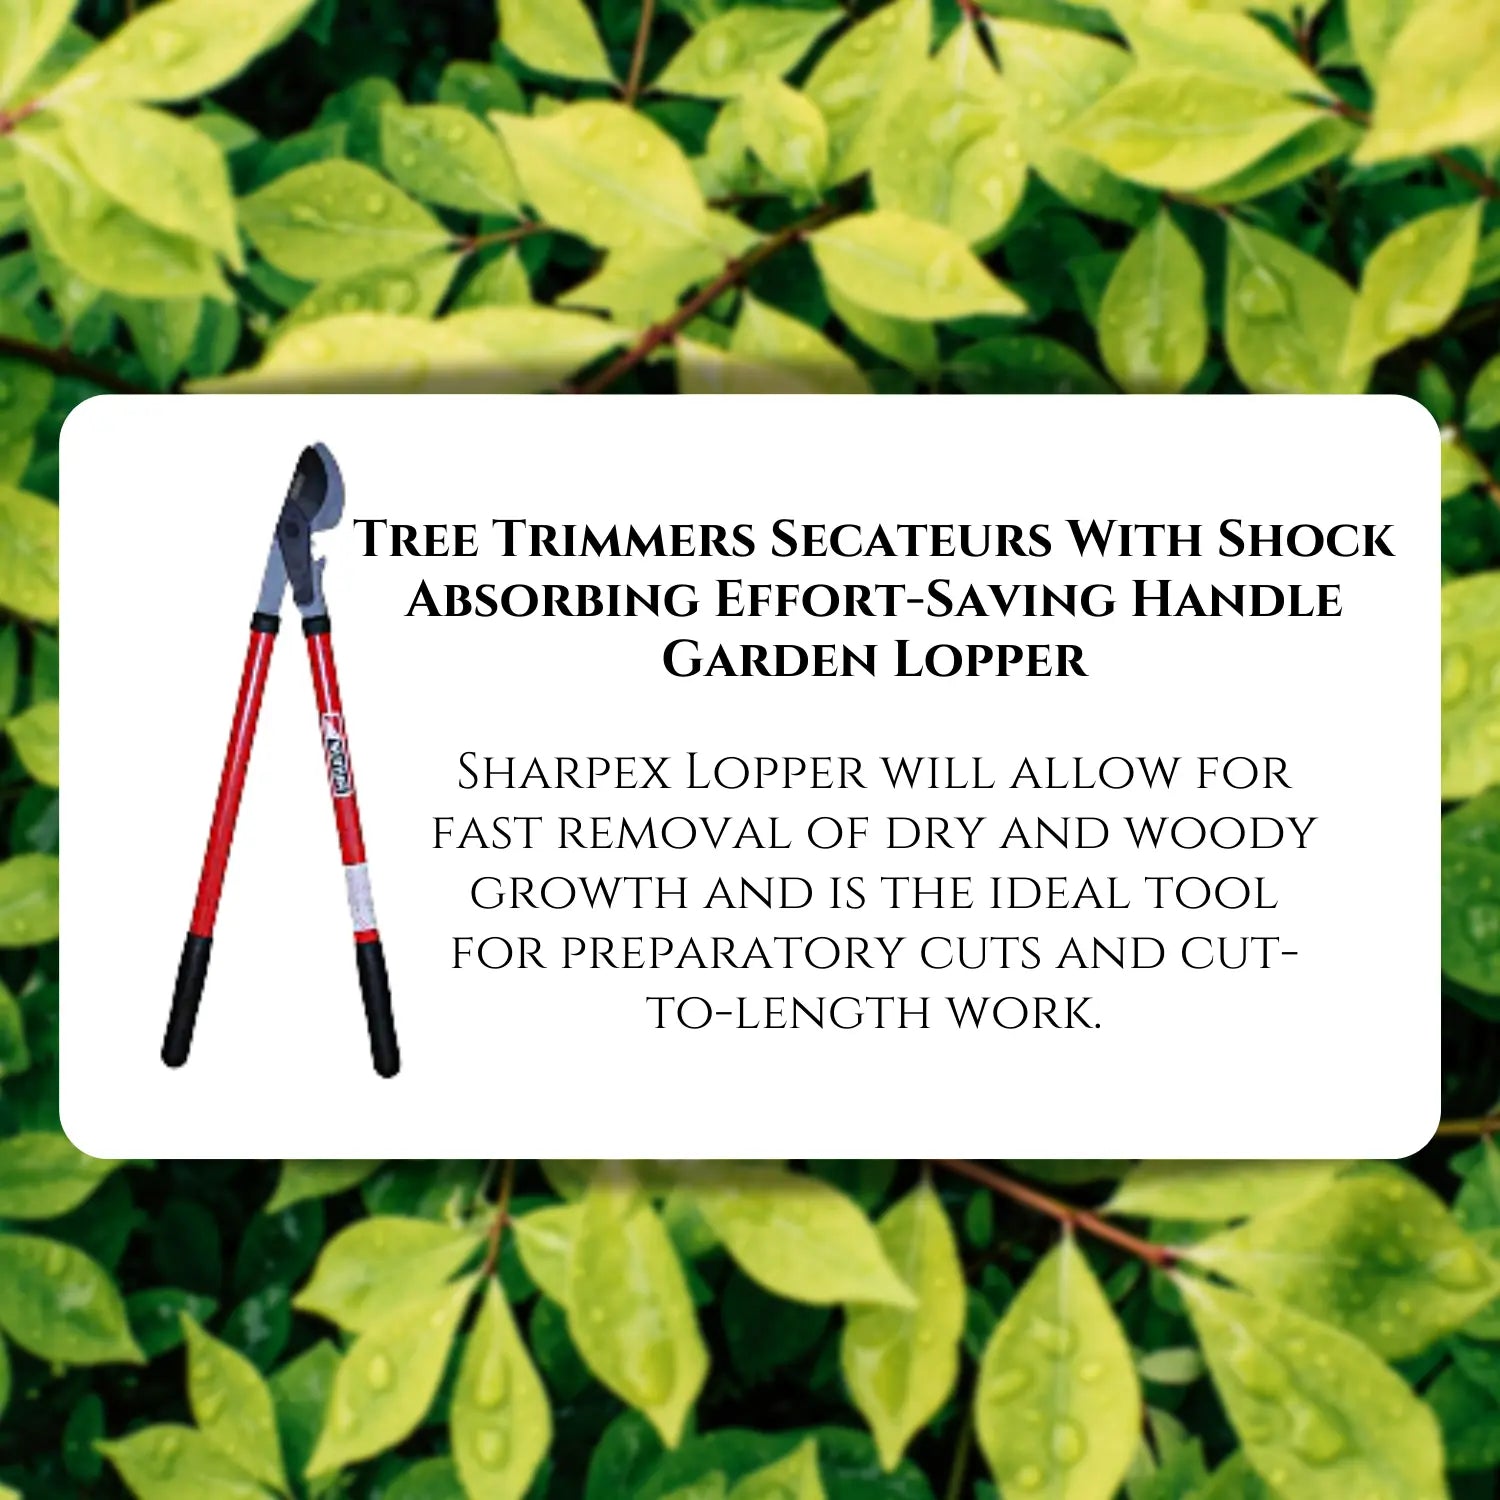 Bypass Lopper with Compound Action, Professional Bypass Lopper, Tree Trimmers Secateurs with Shock Absorbing Effort-Saving Handle Garden Lopper - Pruning Tool